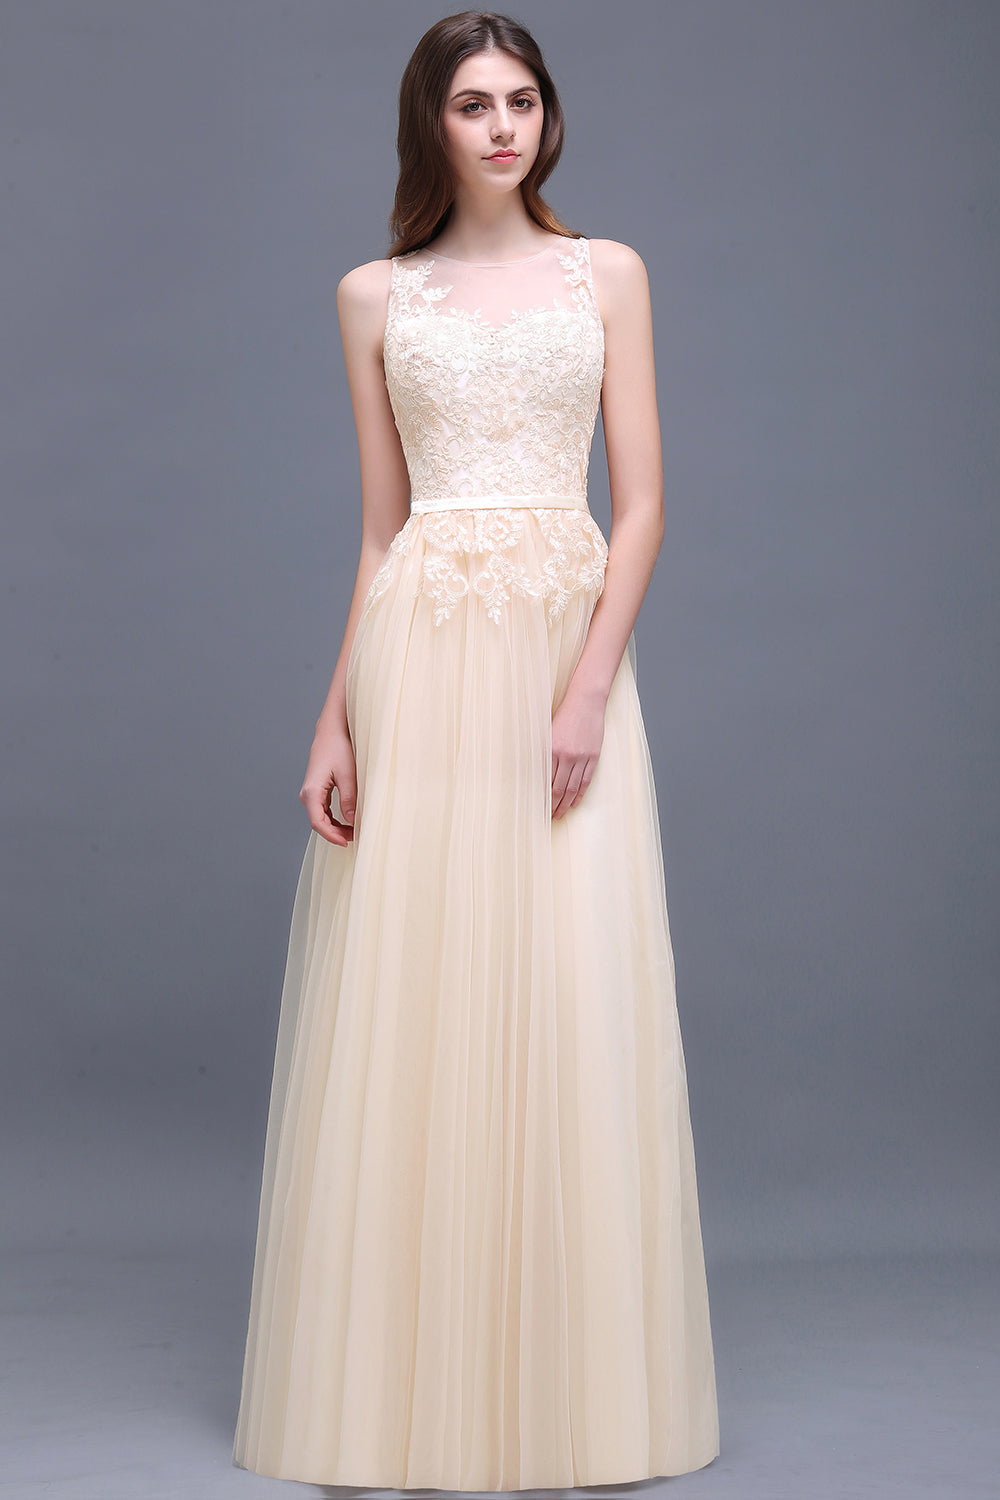 Elegant Tulle Lace Champagne Long Bridesmaid Dress With Appliques-27dress